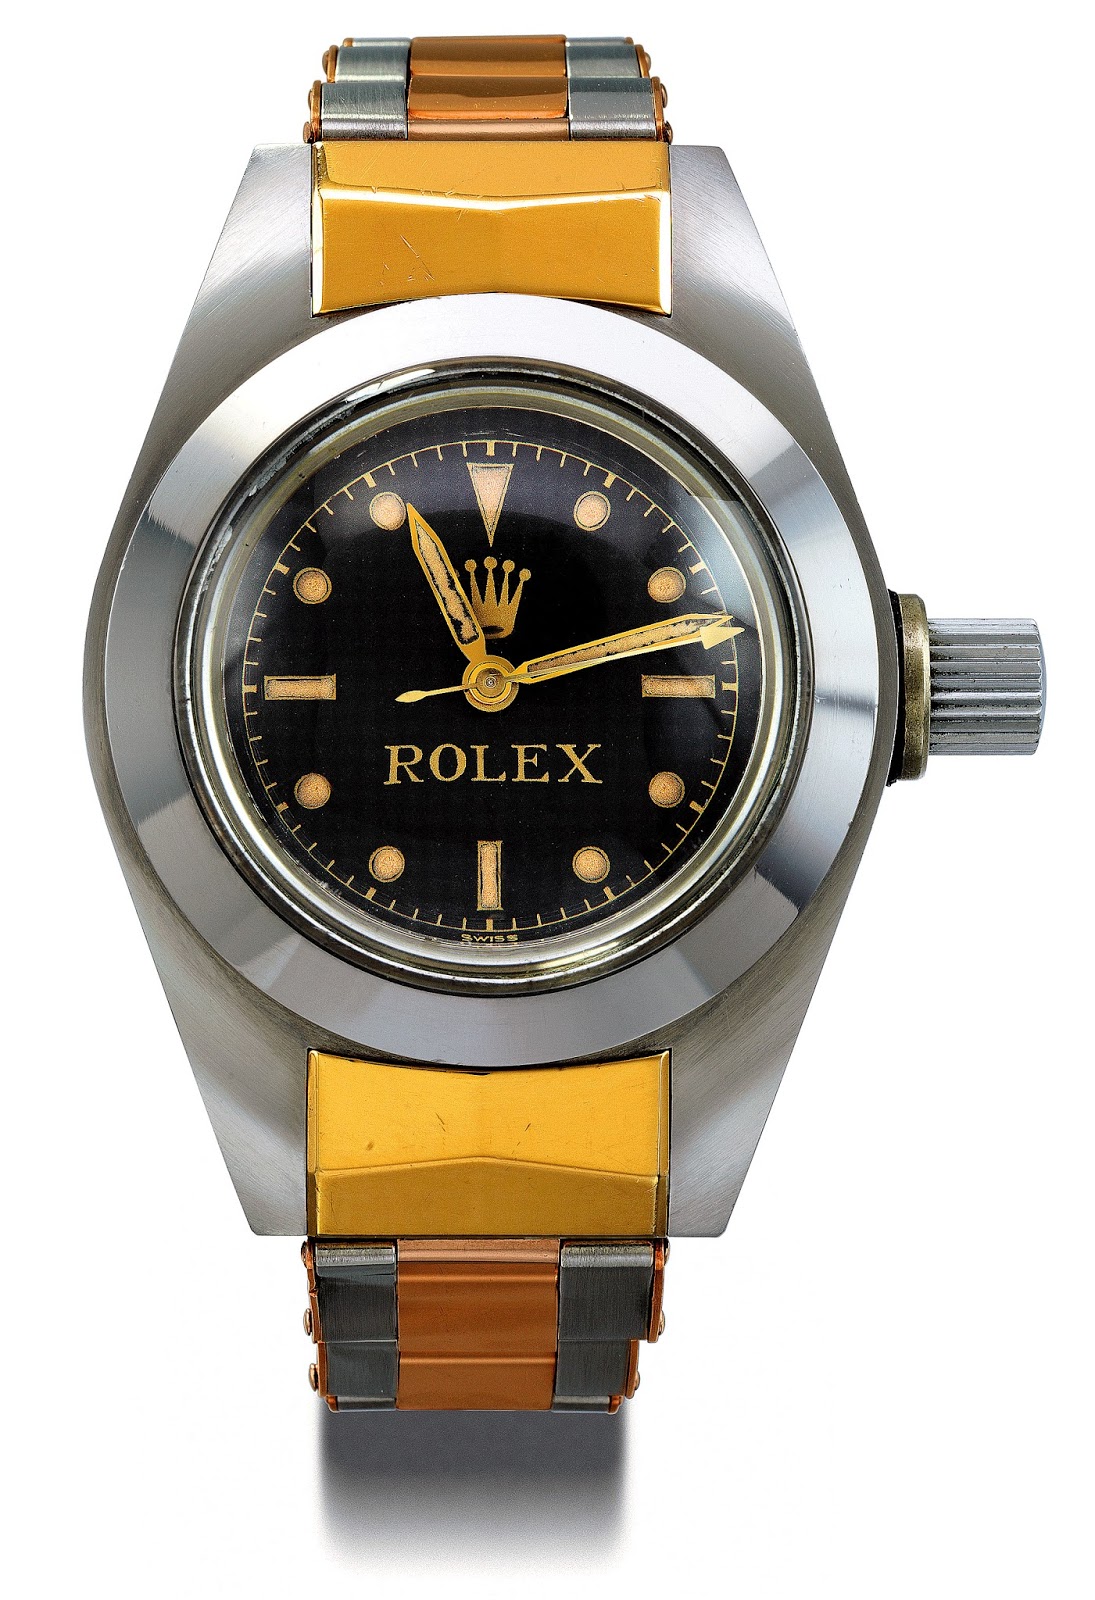 The Rolex Deep Sea Special Story of Piccard & Walsh. - Rolex